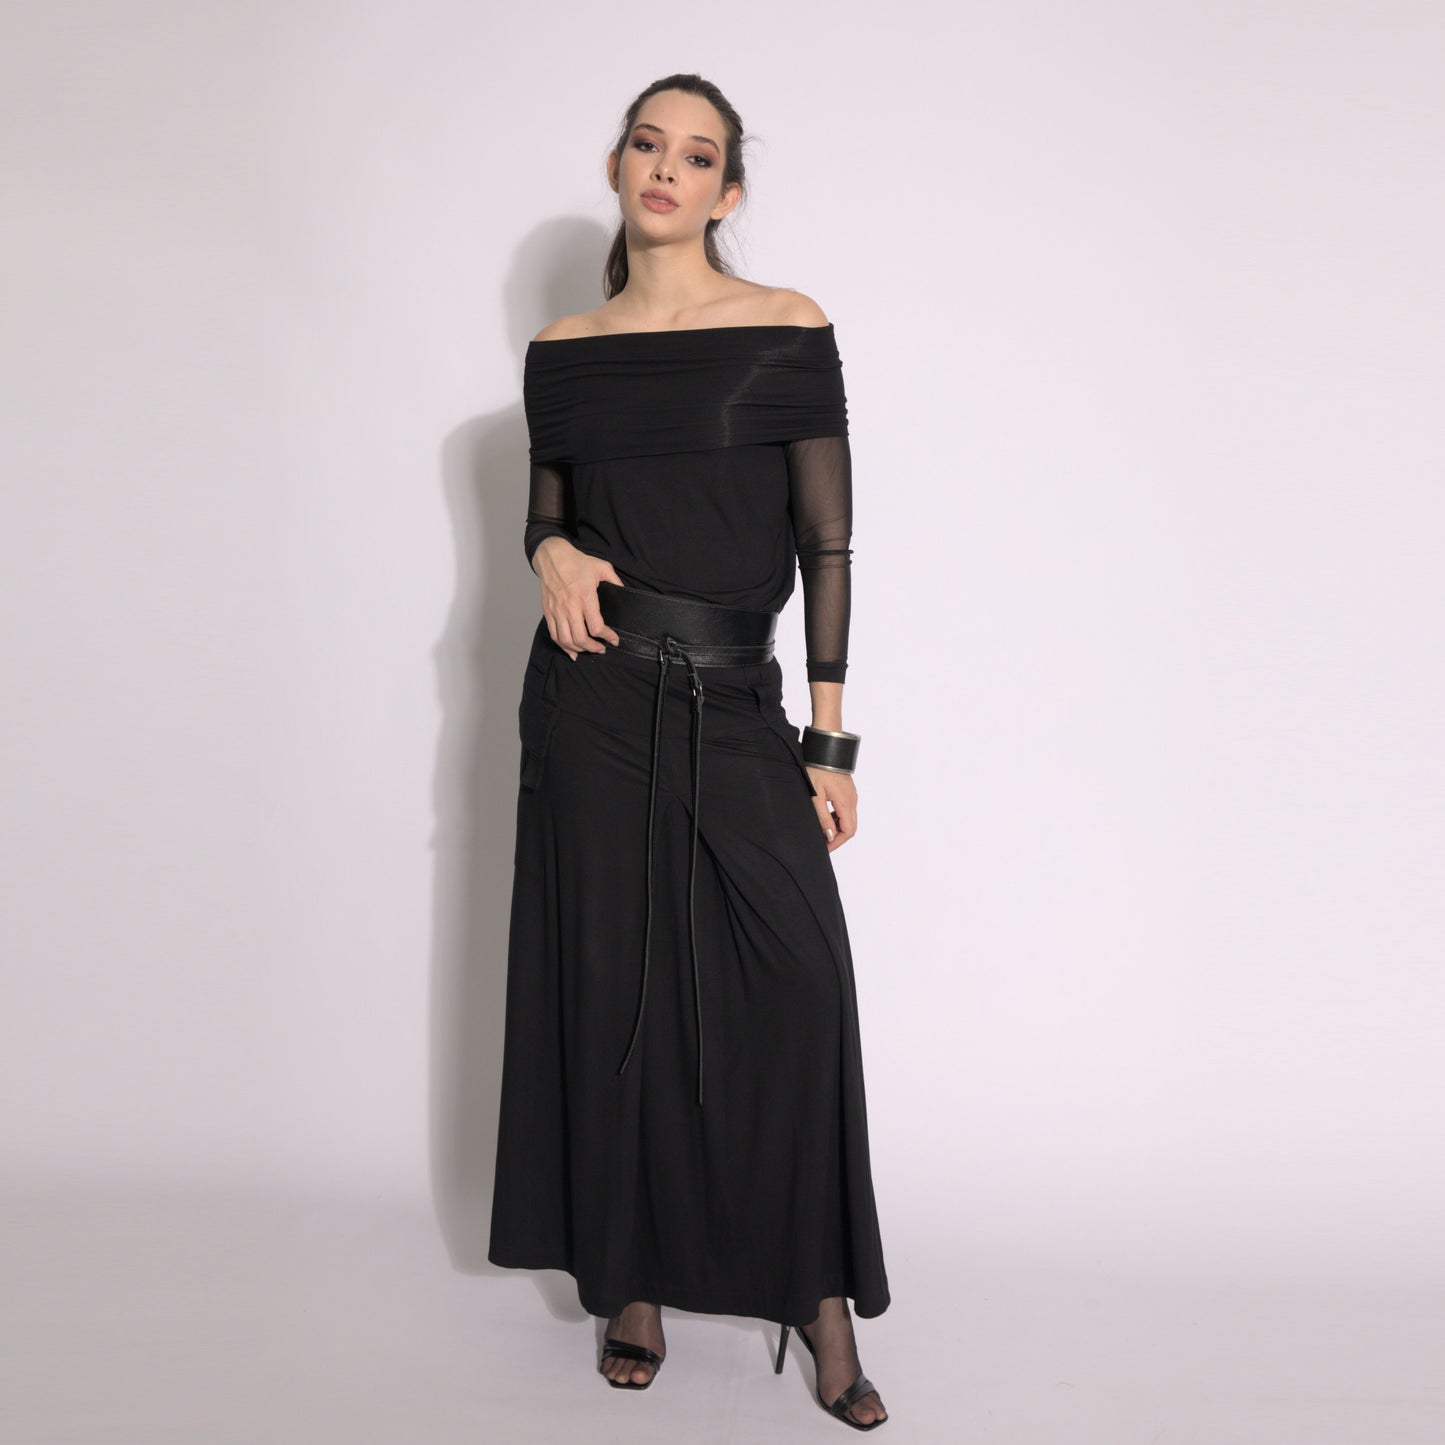 Isabella - Blouse with off-the-shoulder neckline and black tulle sleeves